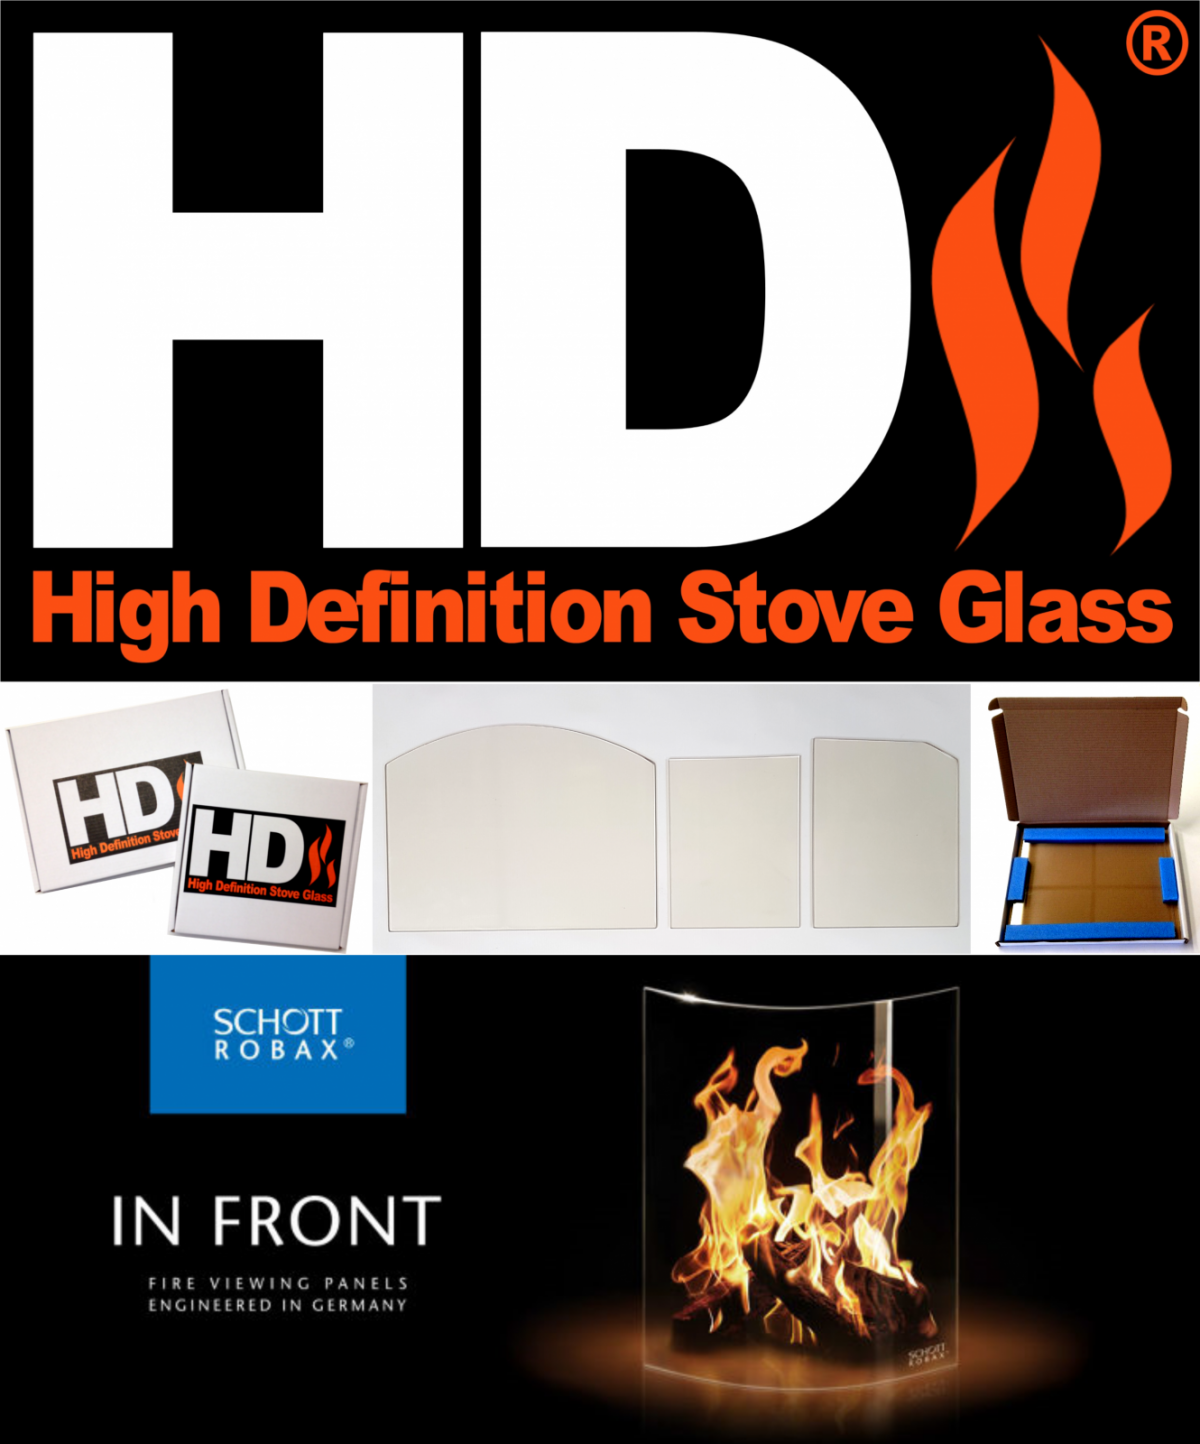 High Definition Stove Glass for the Bronpi Locker